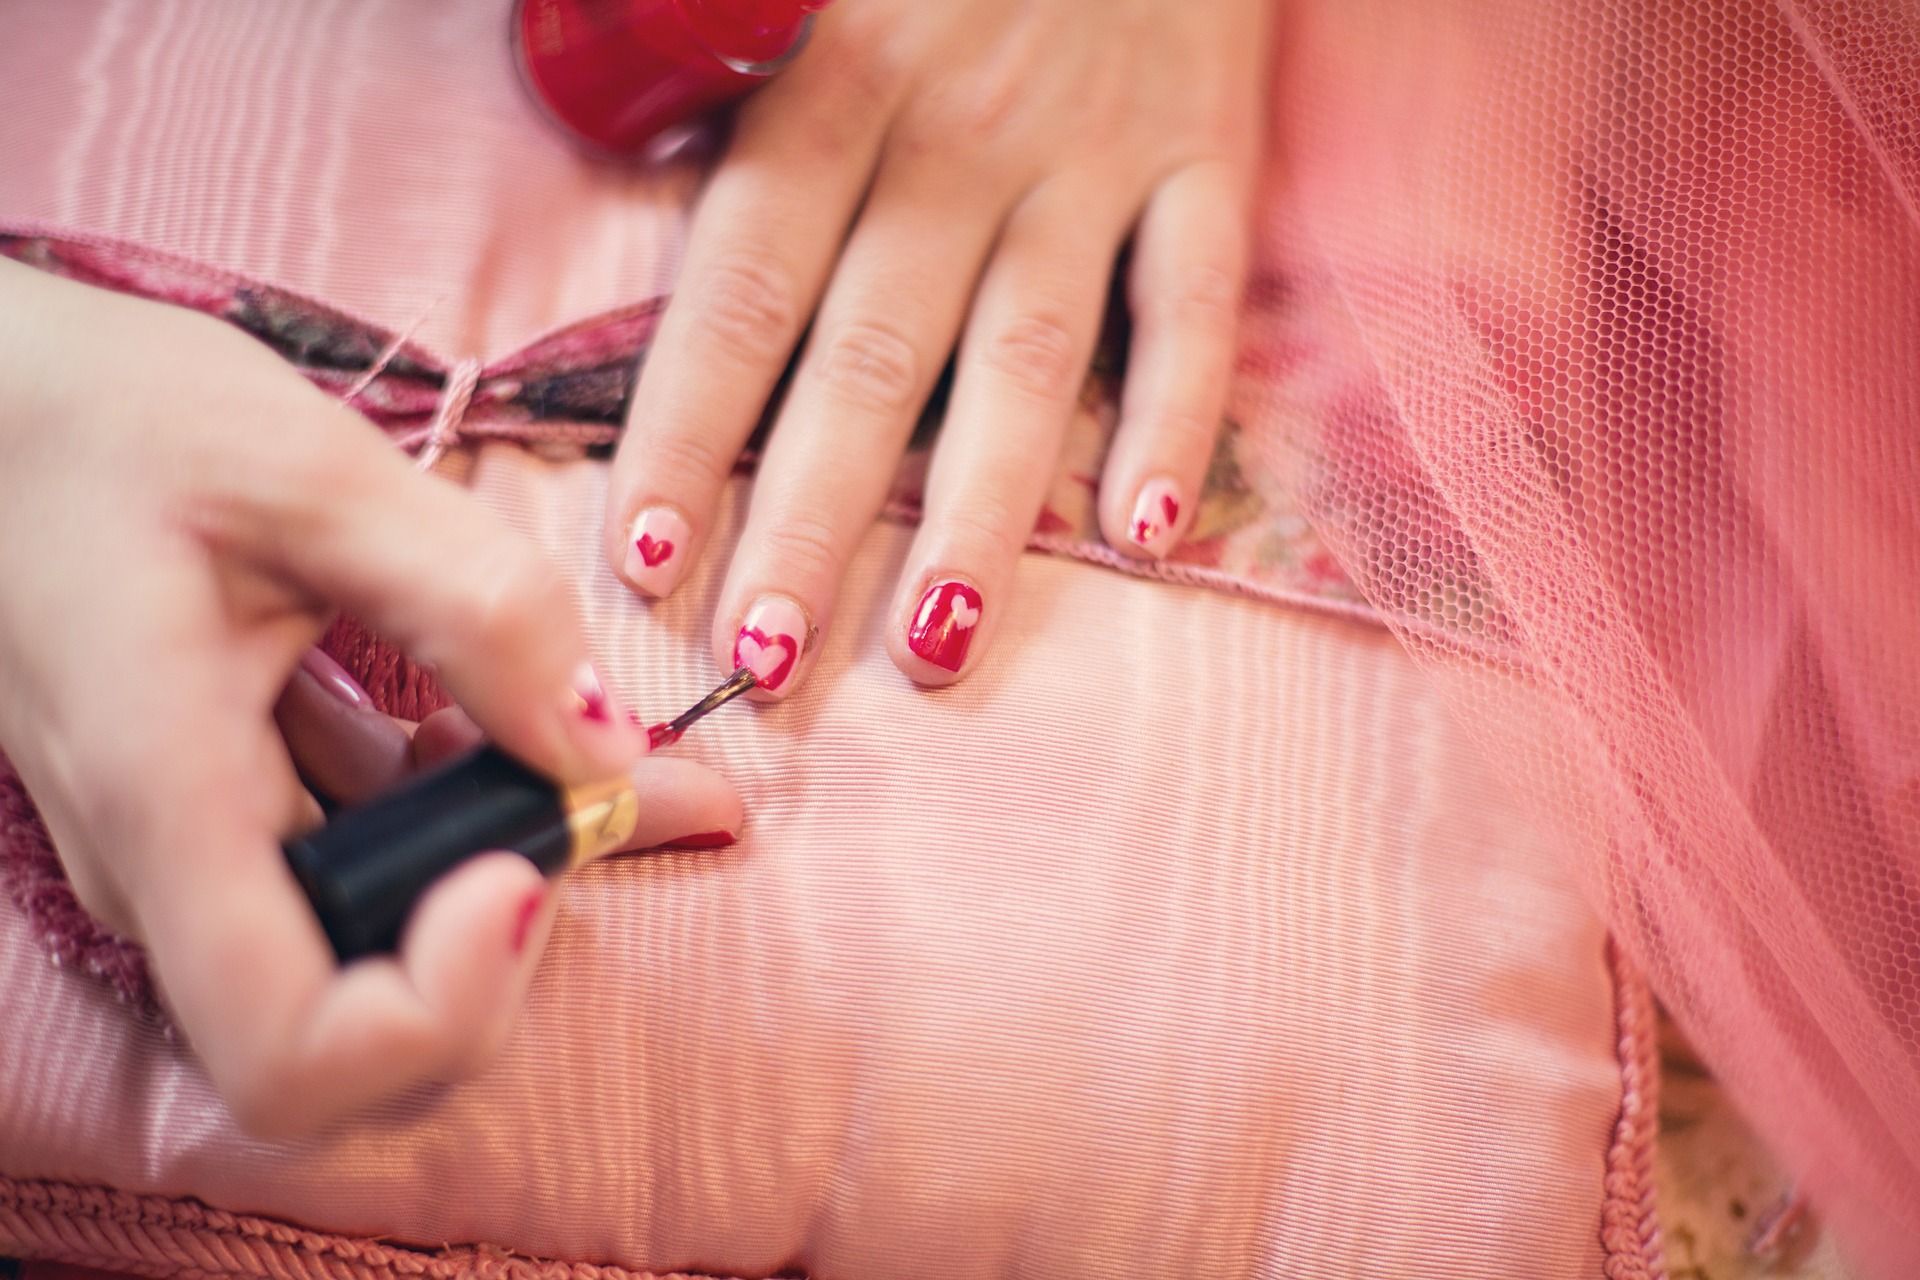 Subscribe to these YouTube channels for the best nail art inspiration